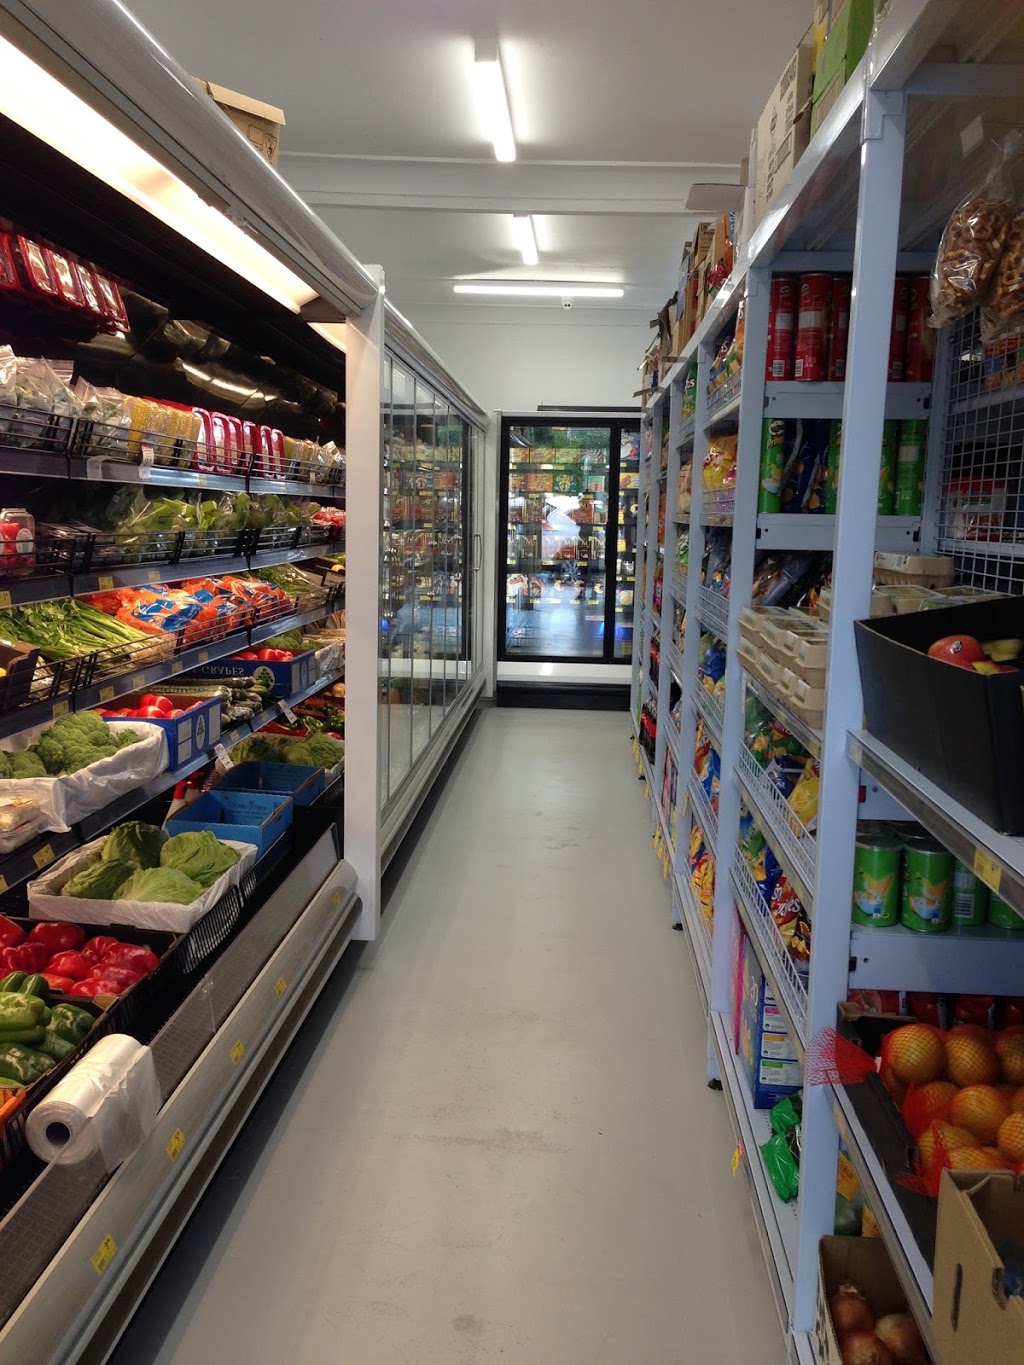 Friendly Grocer Seaforth | store | 38 Frenchs Forest Rd, Seaforth NSW 2092, Australia | 0280682120 OR +61 2 8068 2120